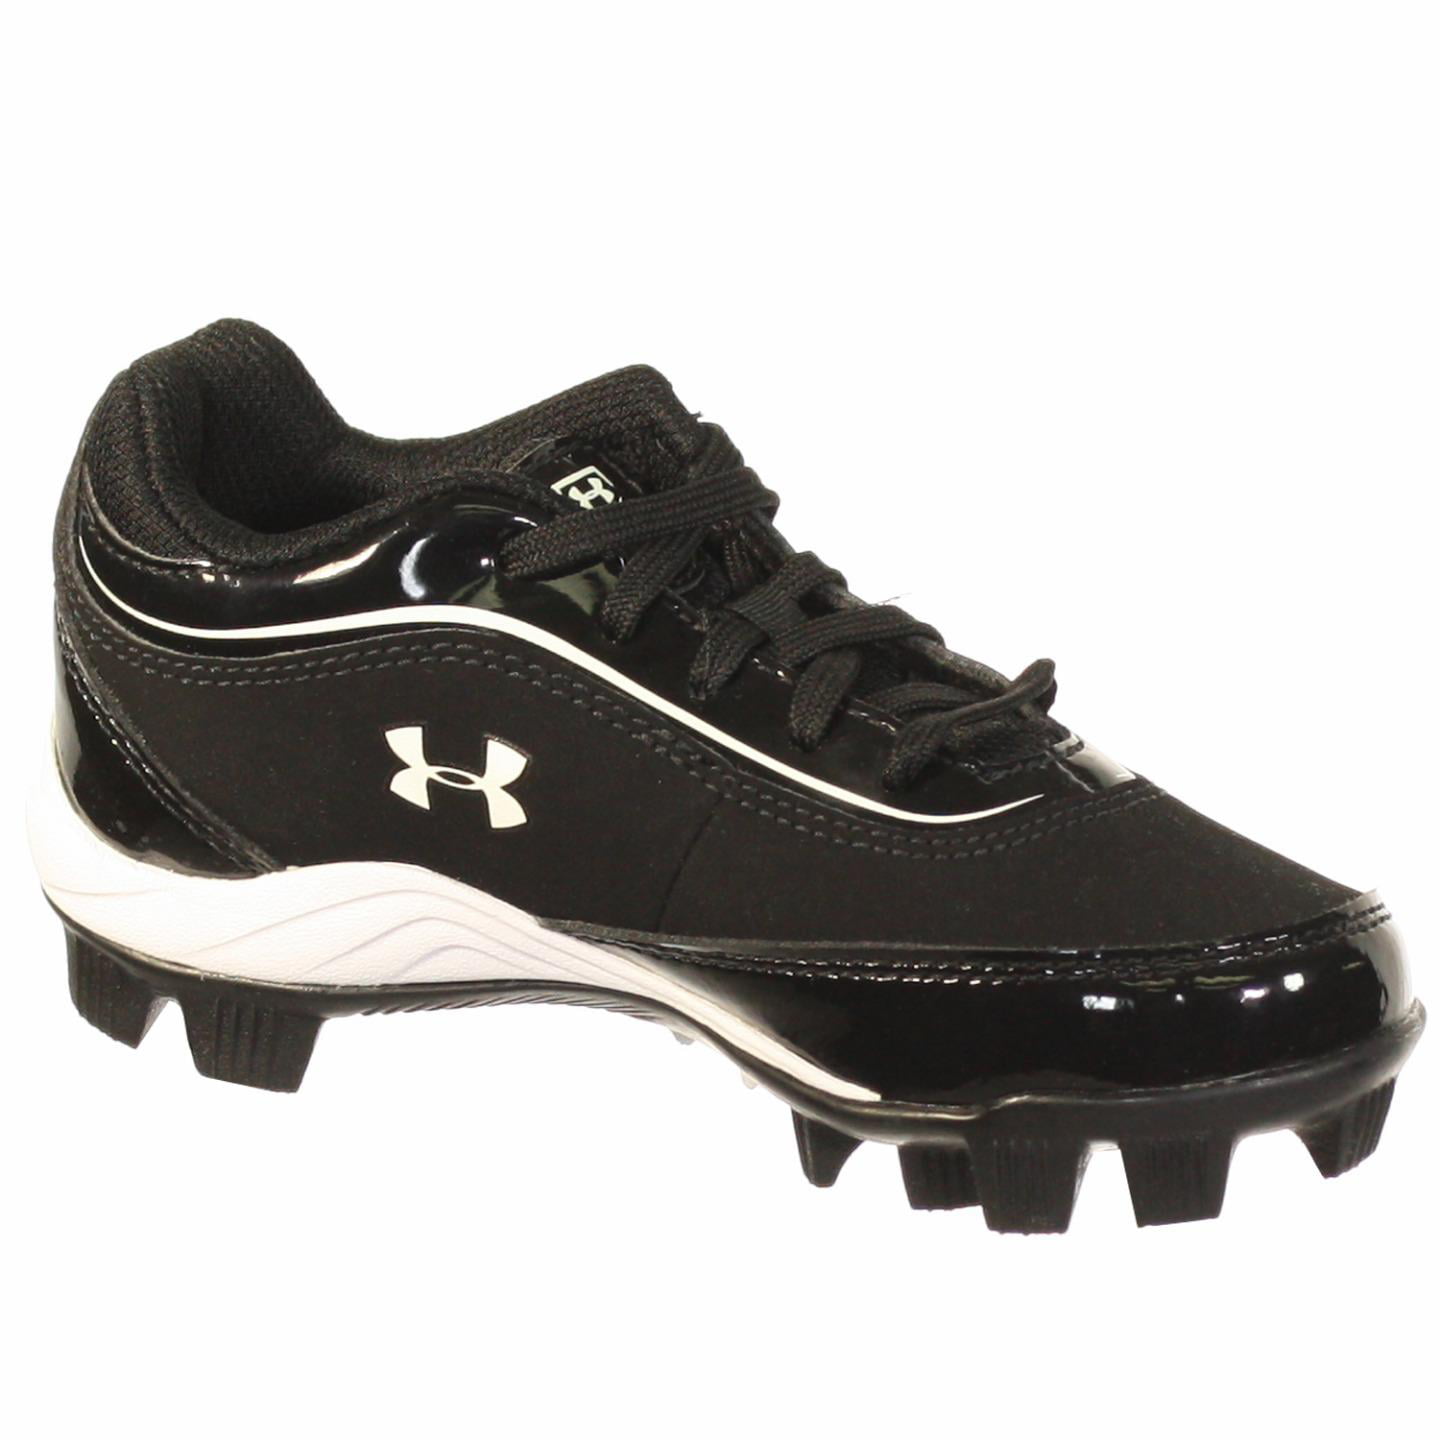 New Youth Under Armour Leadoff Low RM Baseball Cleats Black/White Size 6Y 